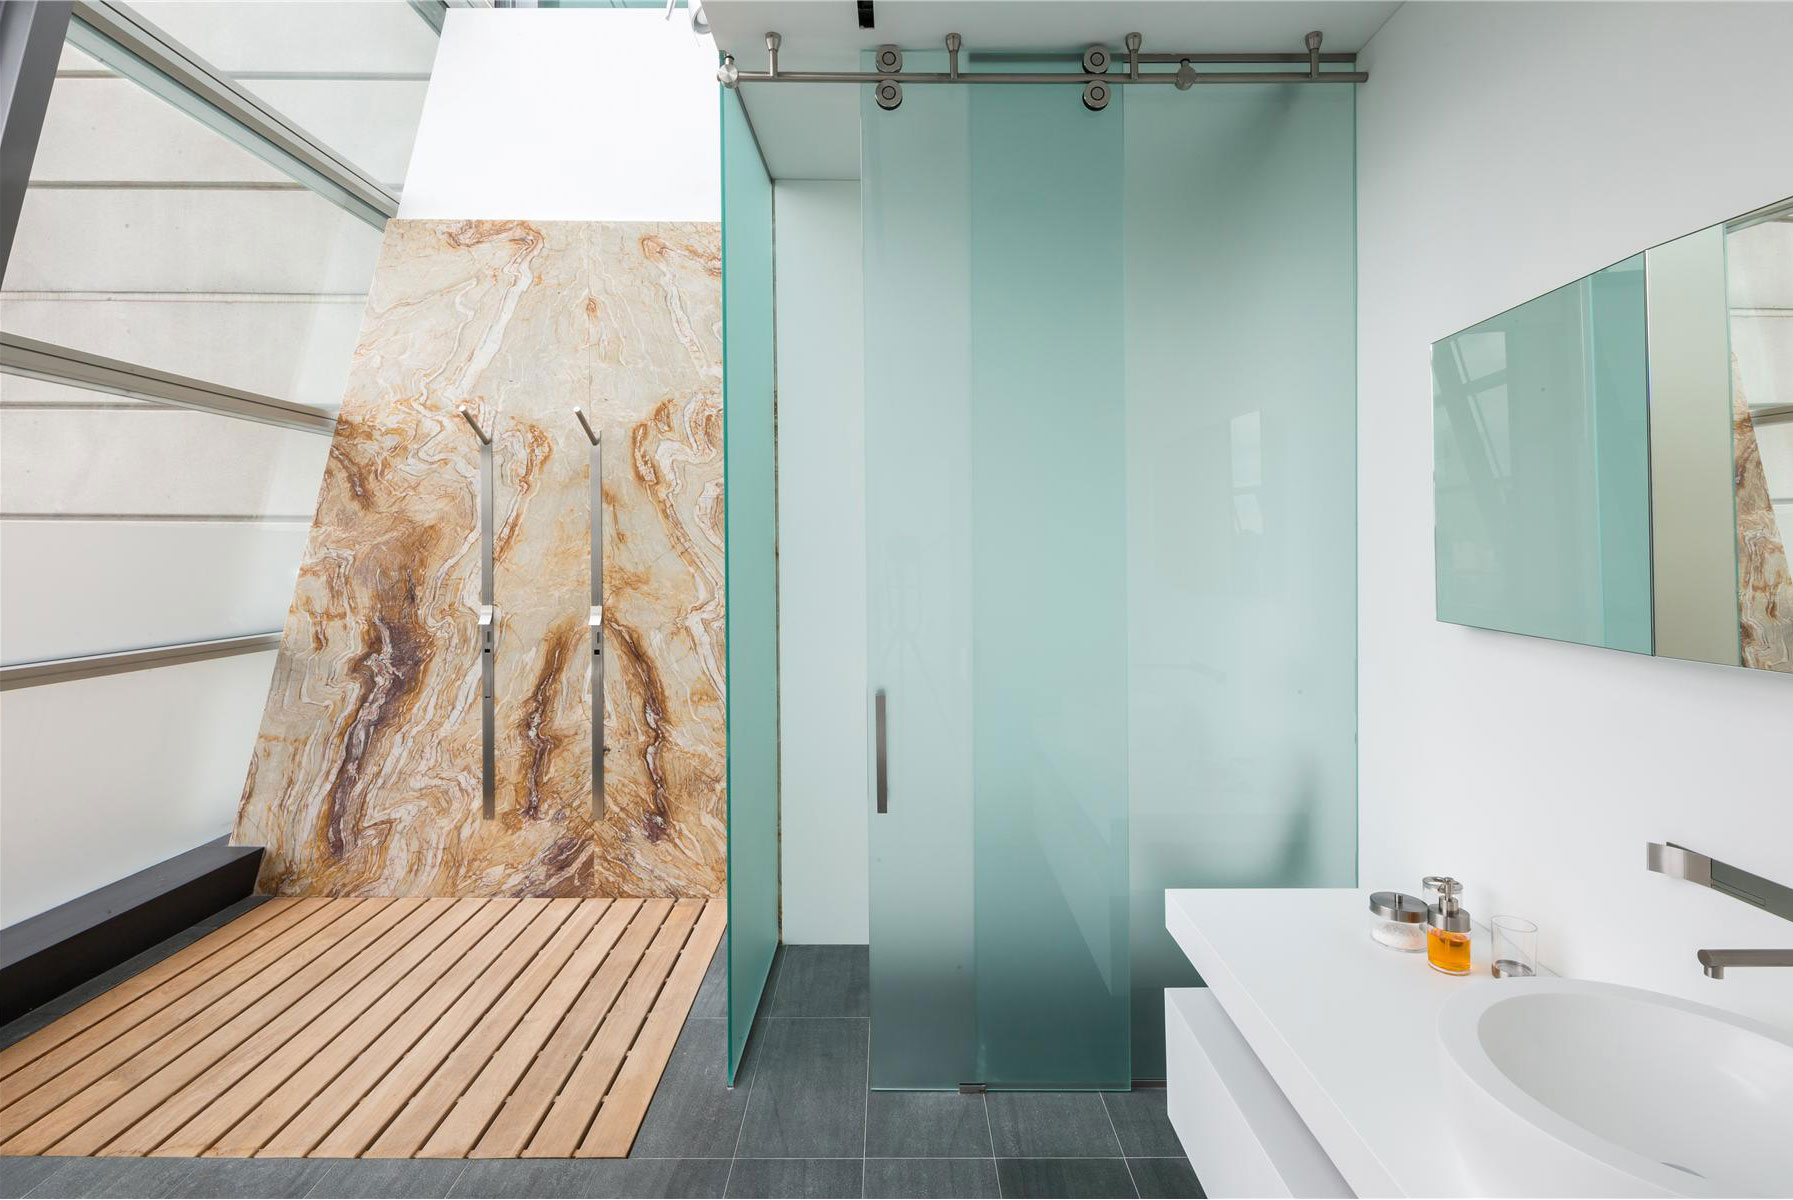 Marble Wall Shower Cool Marble Wall Stainless Steel Shower Wood Floor Frosted Glass Wall In Shower Cabin Whitewashing Stand Rectangular Mirror Architecture Stunning Steel And Glass Structure Reflected In 497 Greenwich Street Penthouse